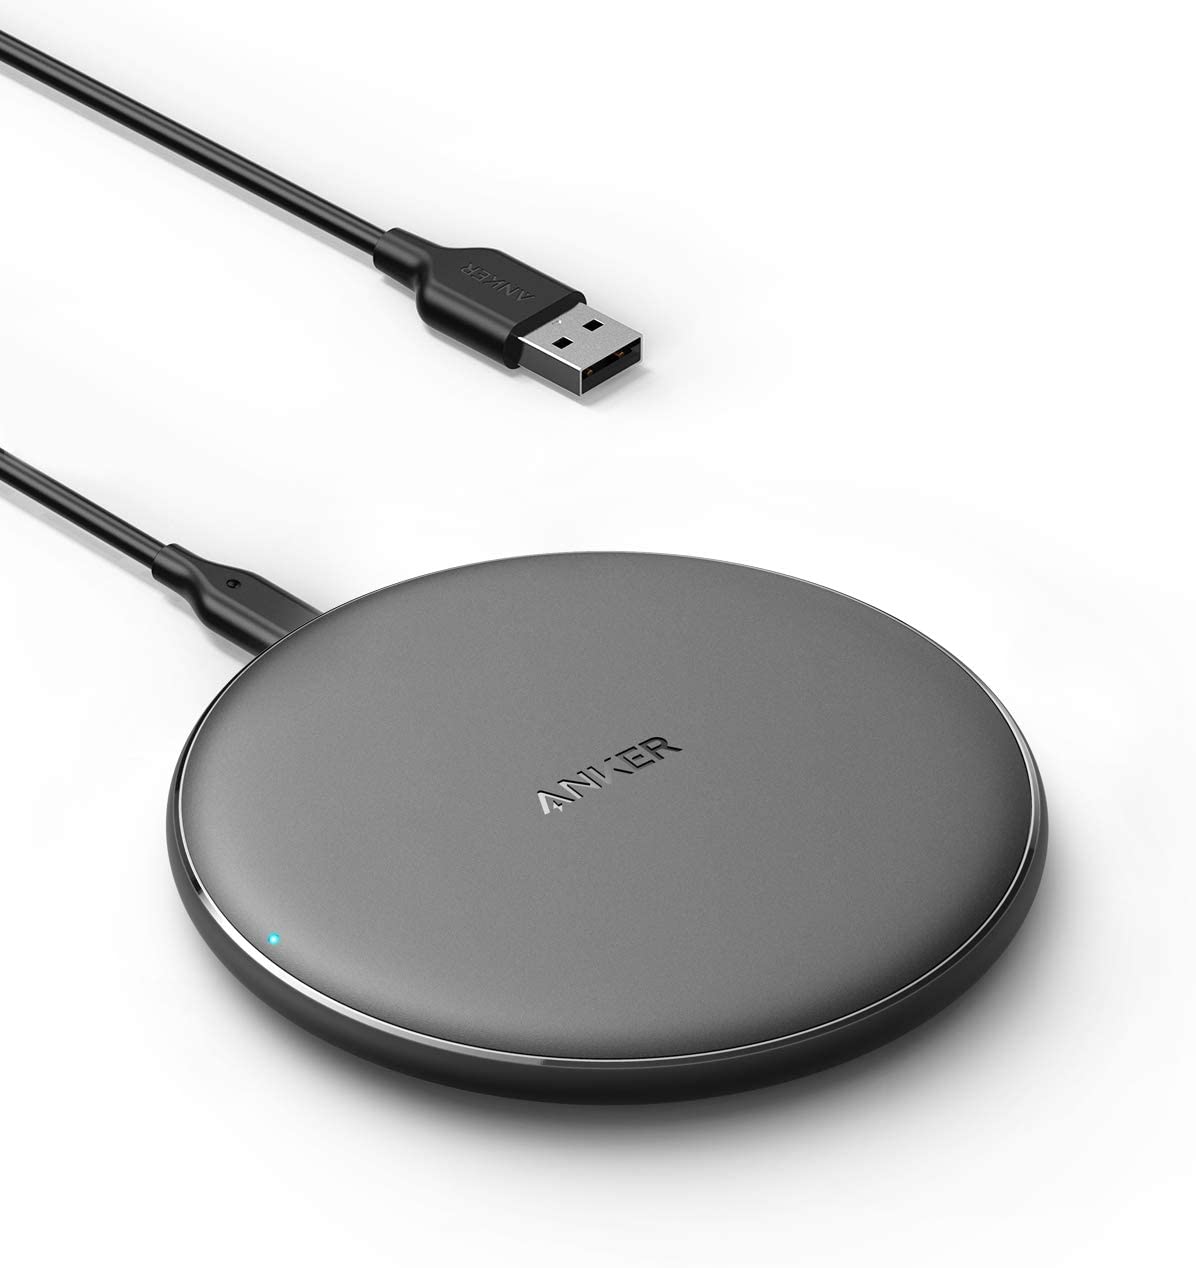 Anker Wireless Charger, PowerWave Pad Qi-Certified 10W Max $9.34